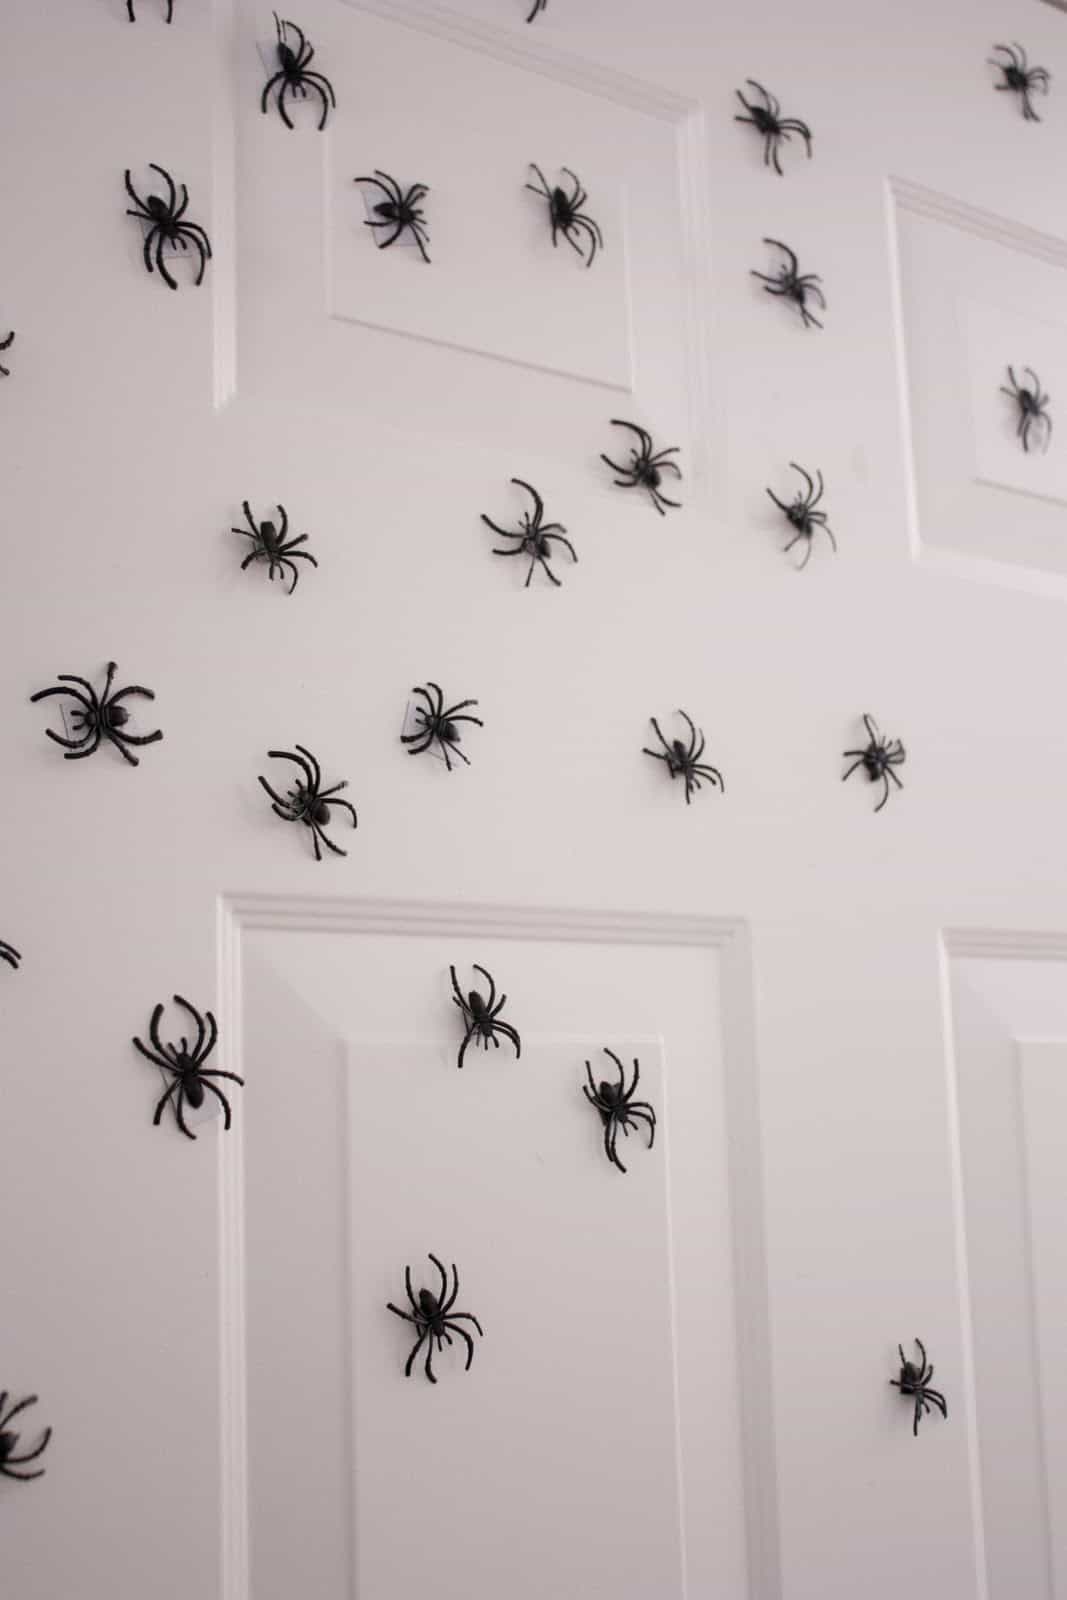 invading spiders make perfect scary Halloween decorations. For more easy scary Halloween decorations go to Made in a Pinch. Get more helpful tips and great recipes by following us on Pinterest!